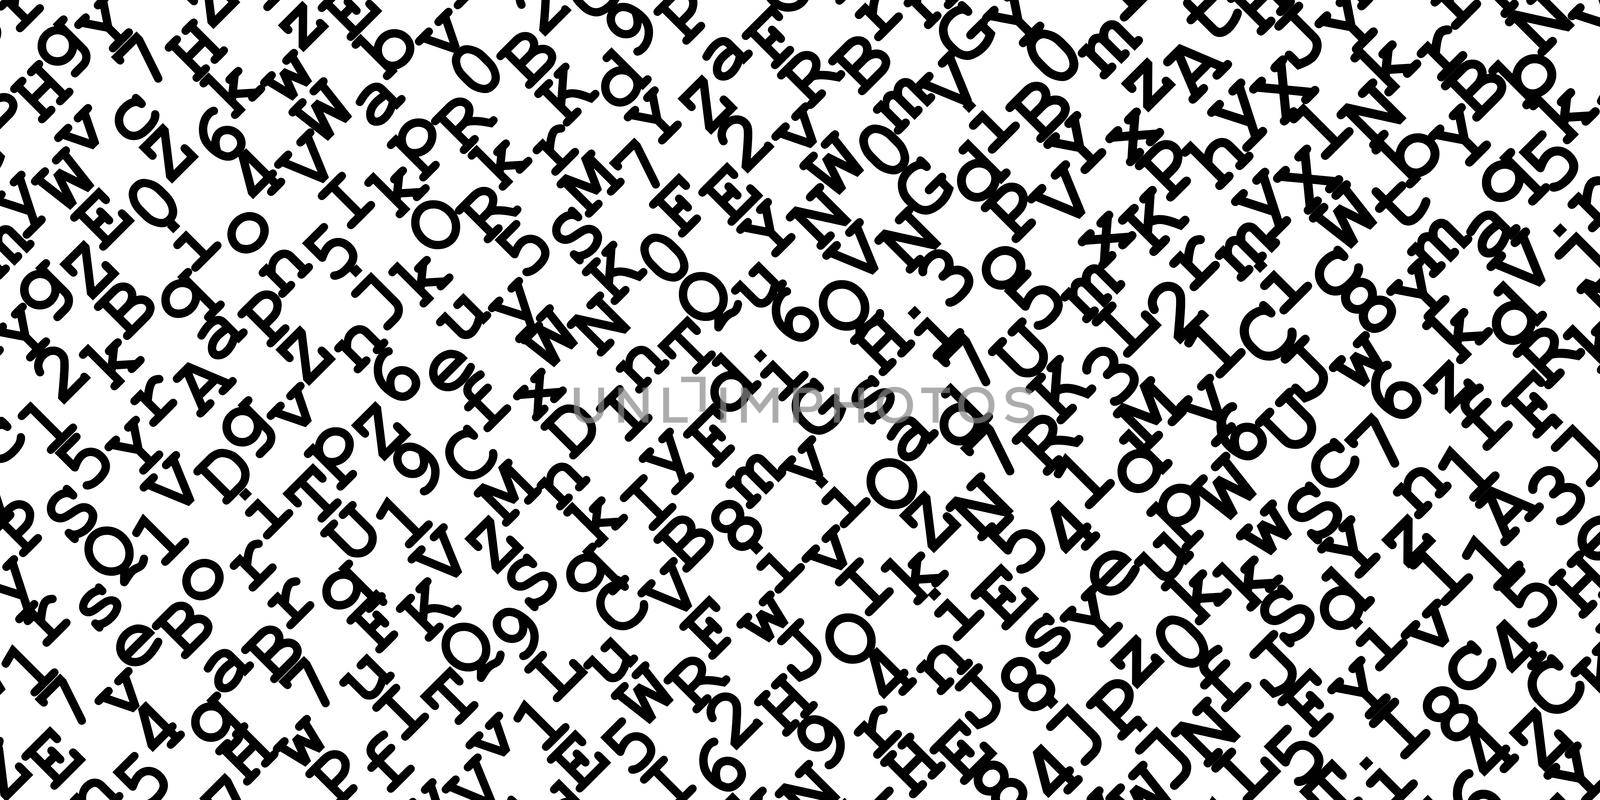 Random black digits and letters on white background by dutourdumonde